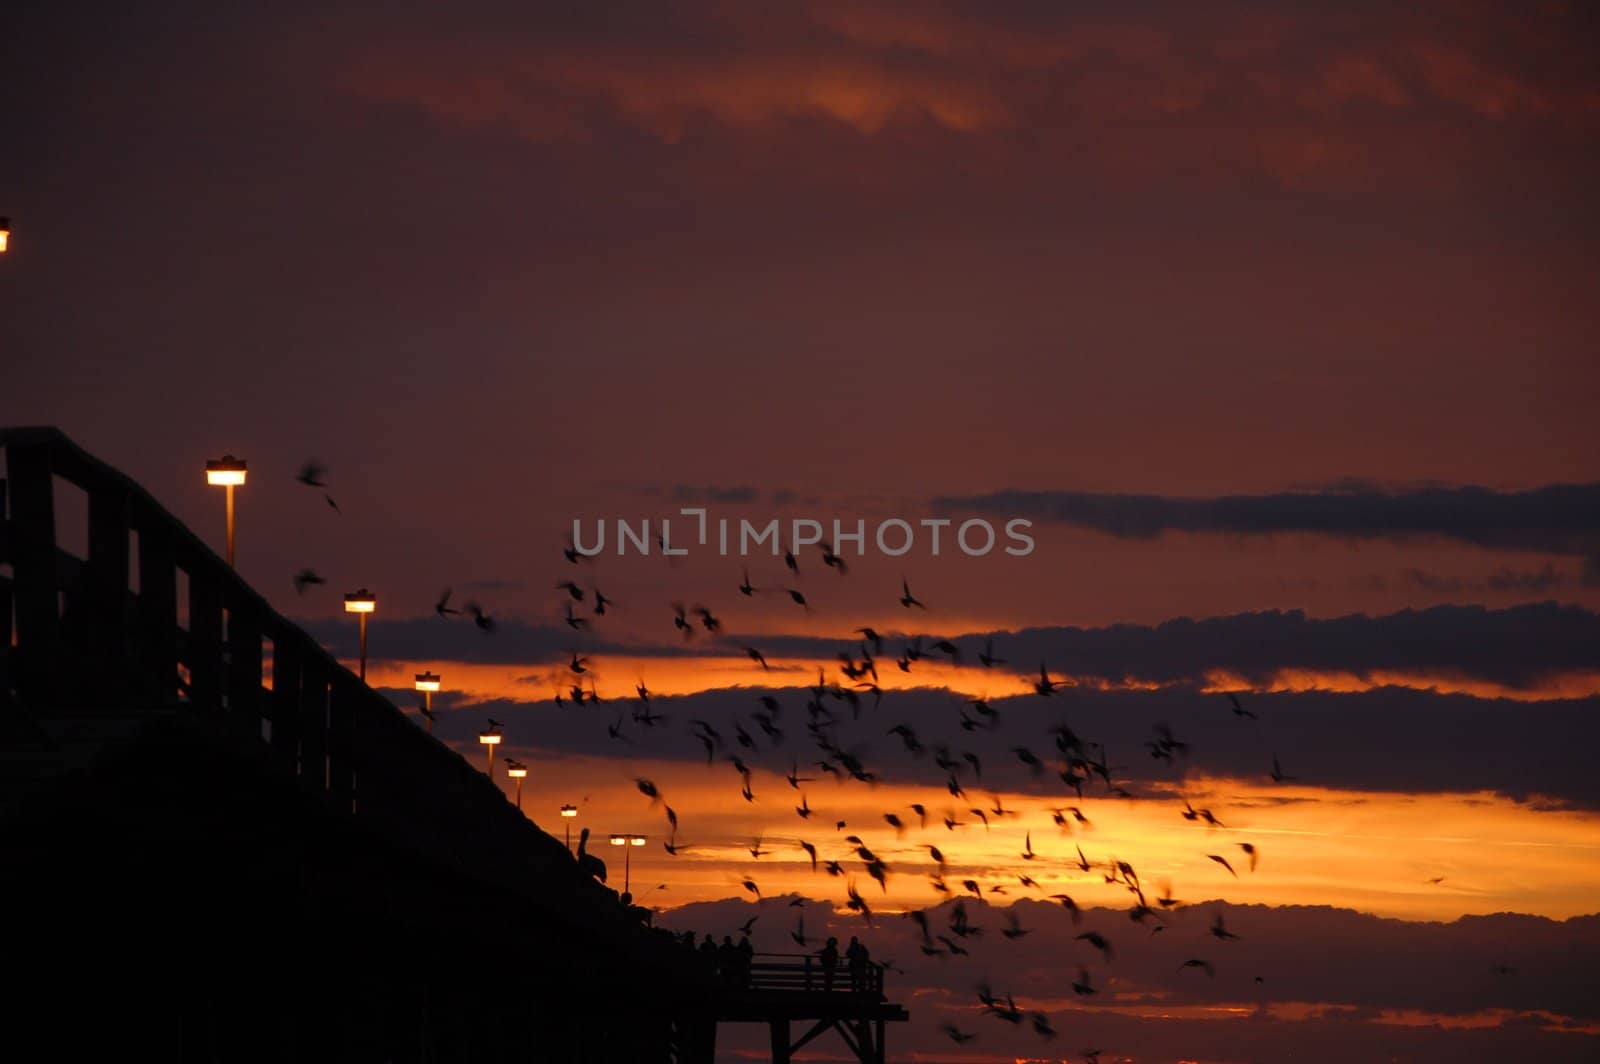 Birds in the dawn by northwoodsphoto